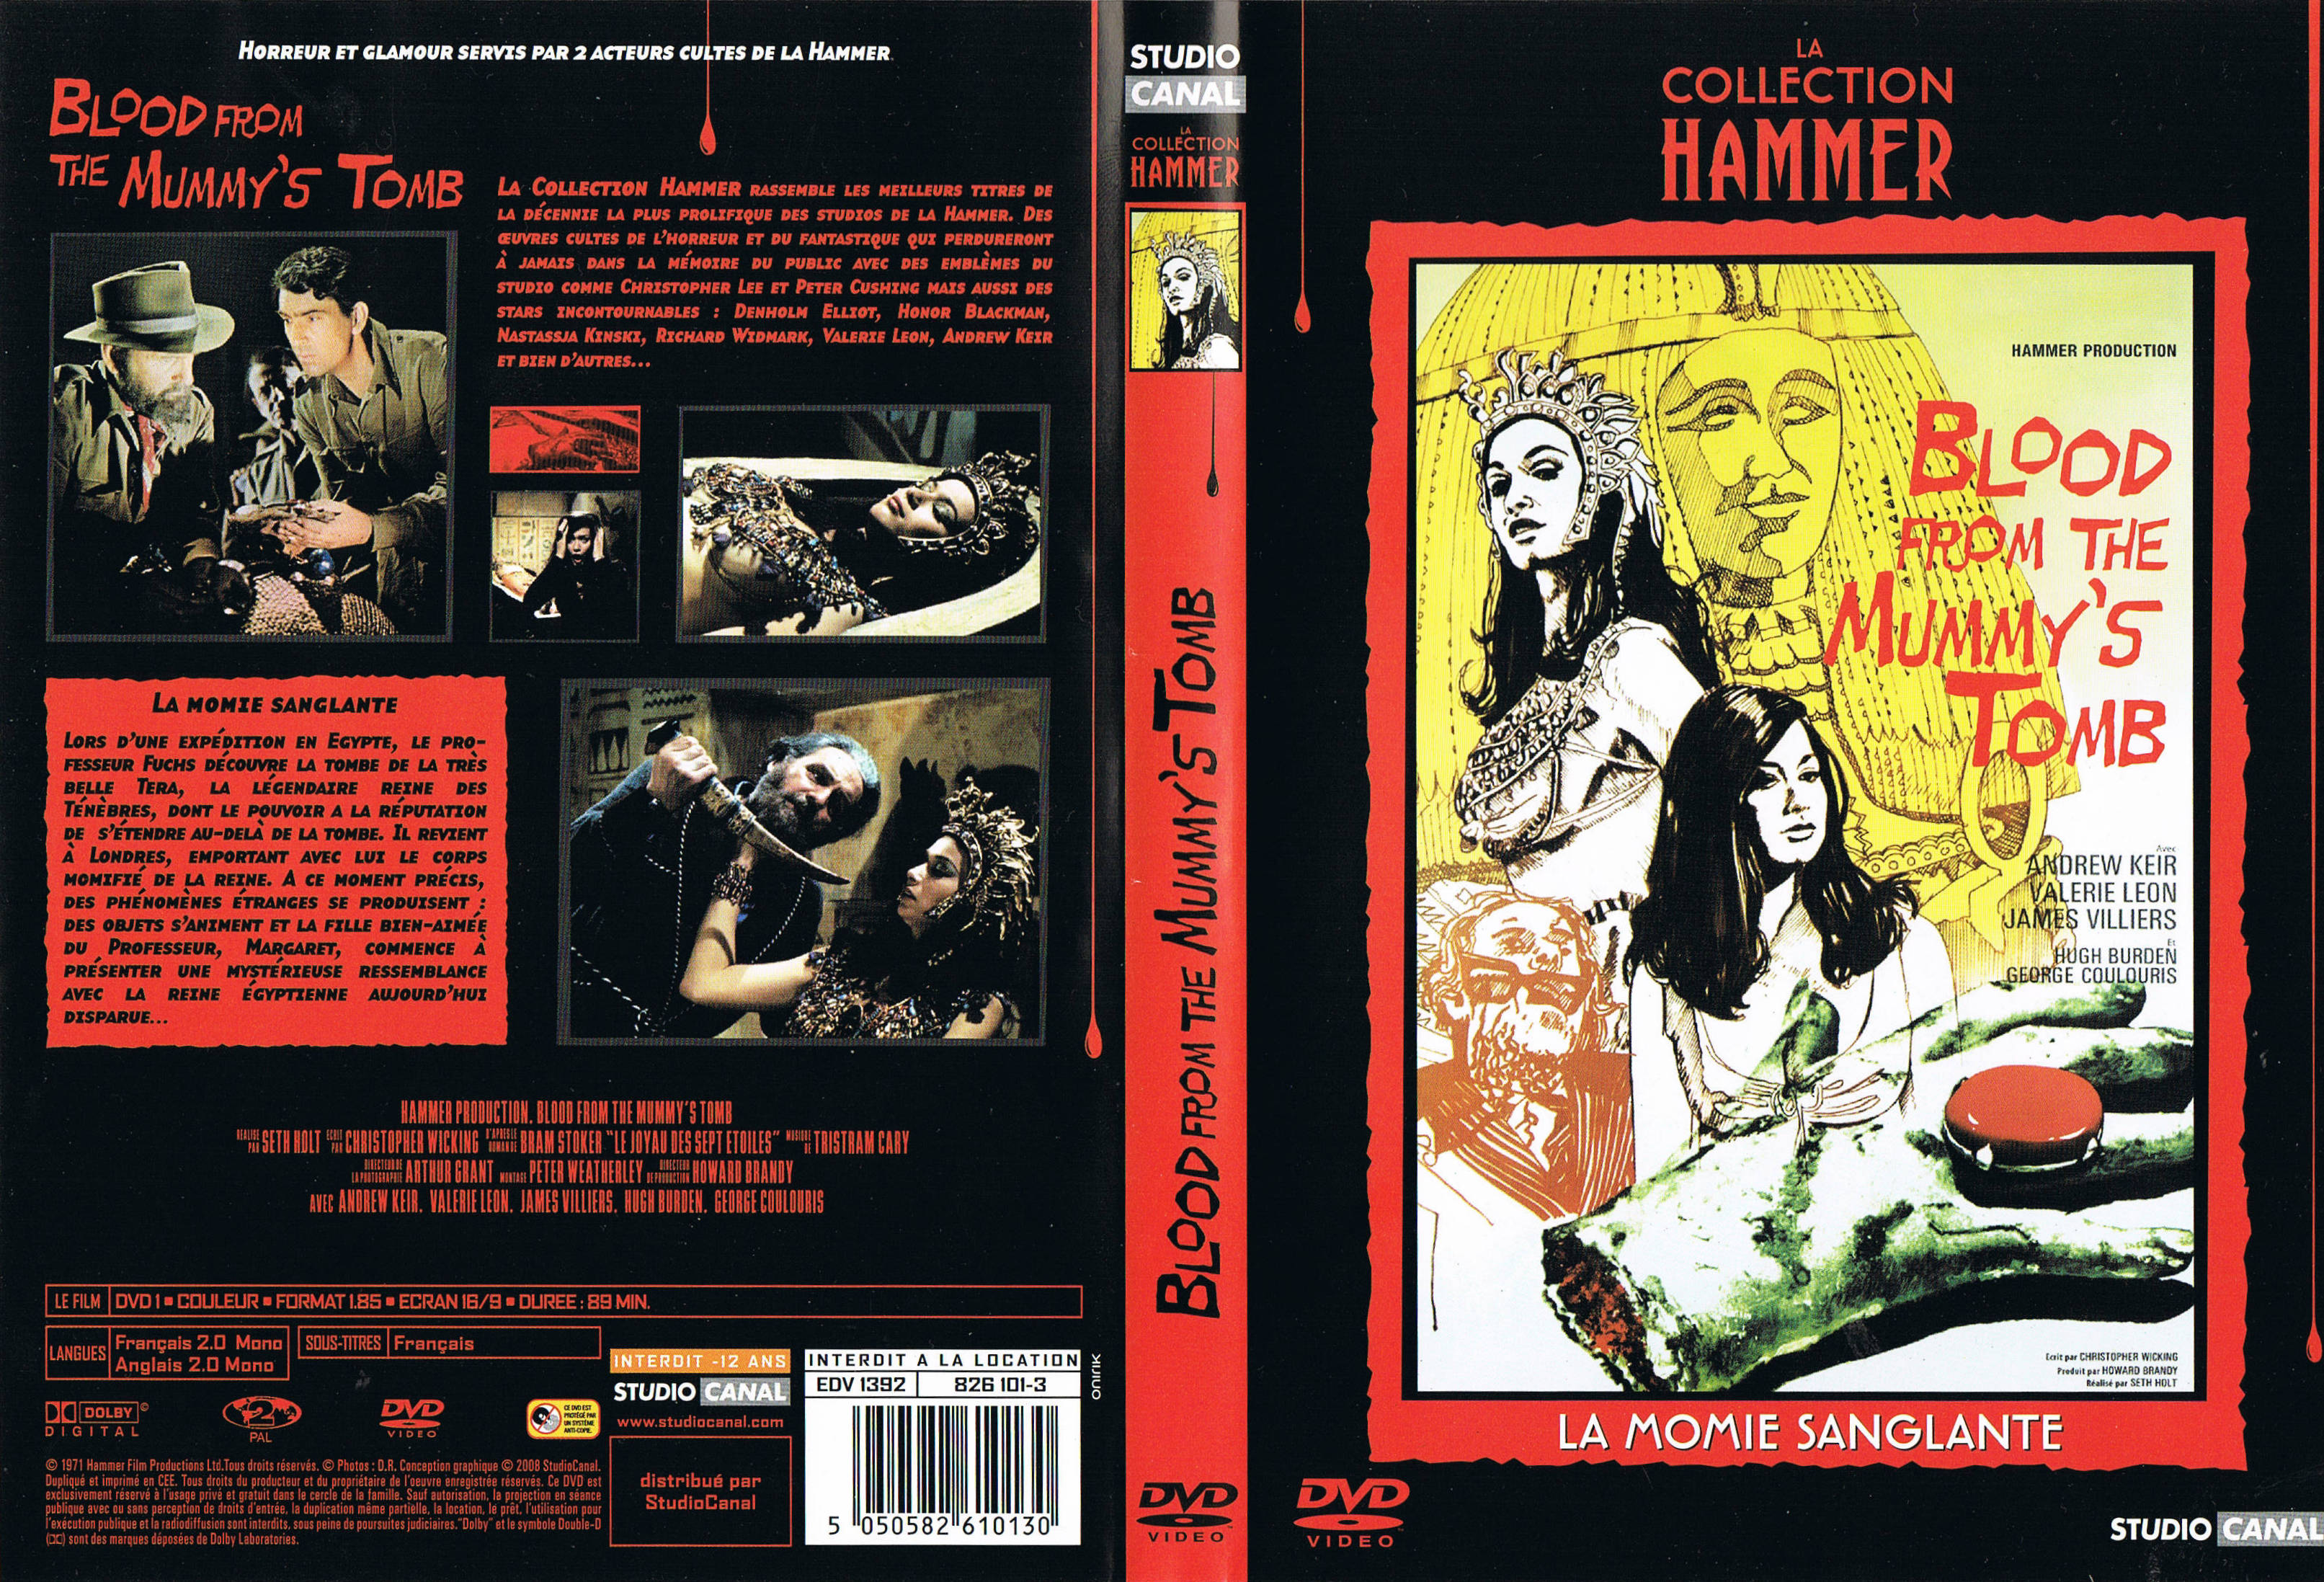 Jaquette DVD Blood from the Mummy